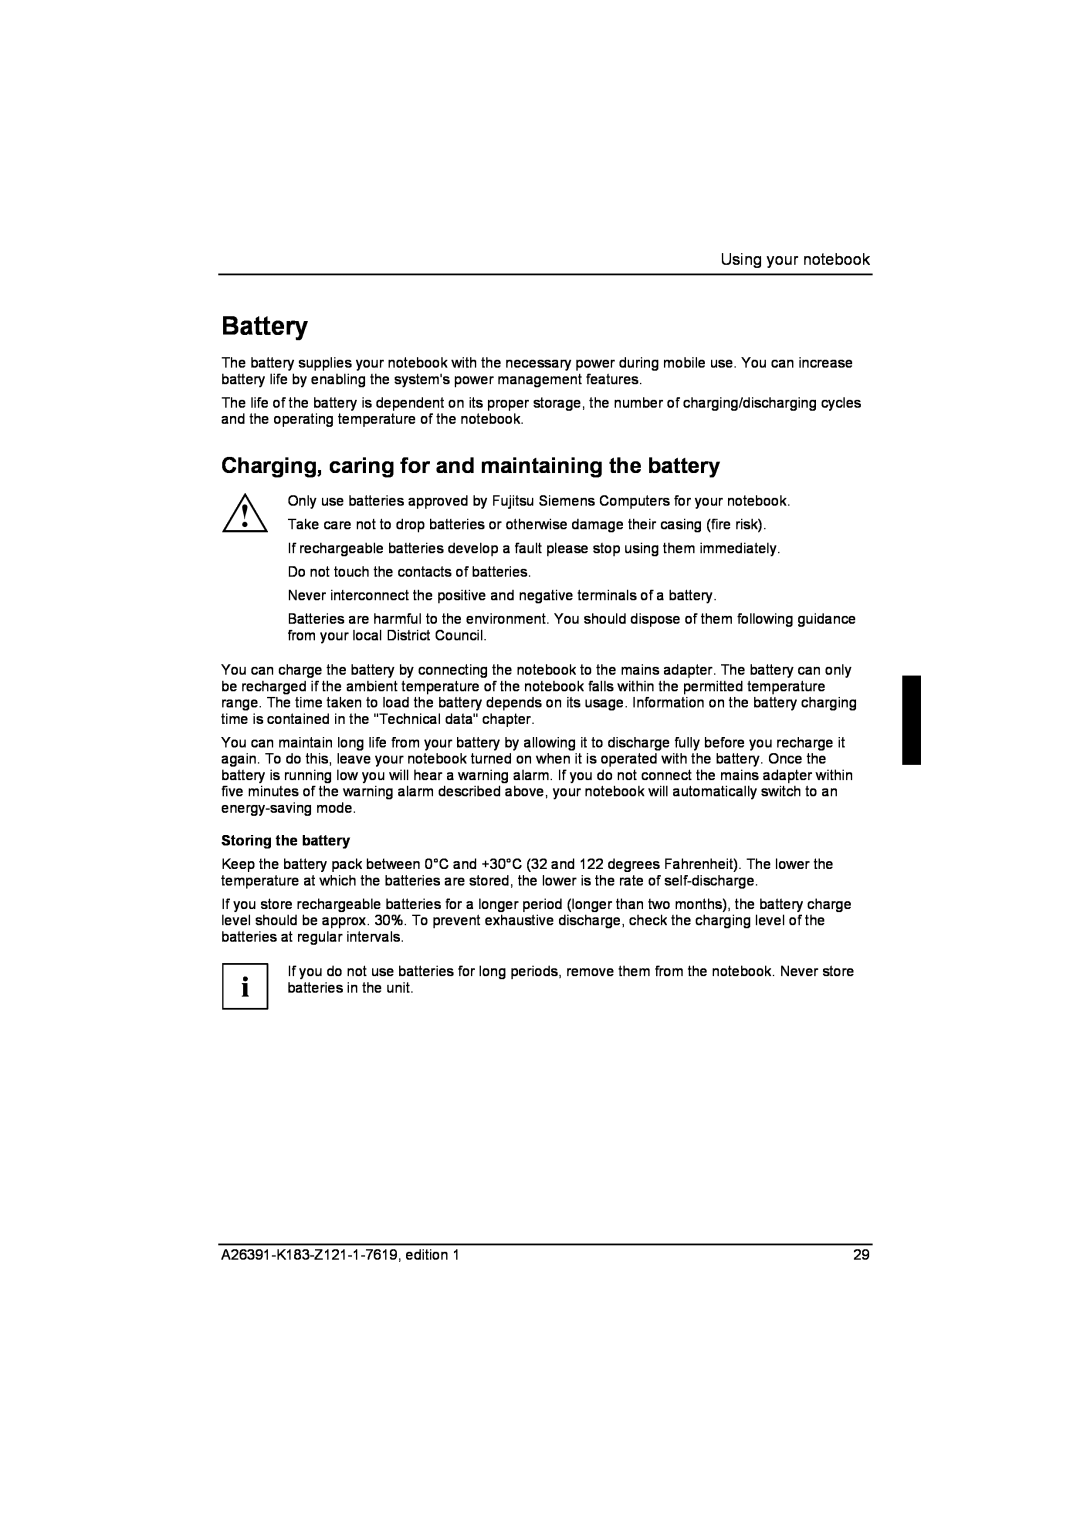 Fujitsu Siemens Computers V2035 manual Battery, Charging, caring for and maintaining the battery, Storing the battery 